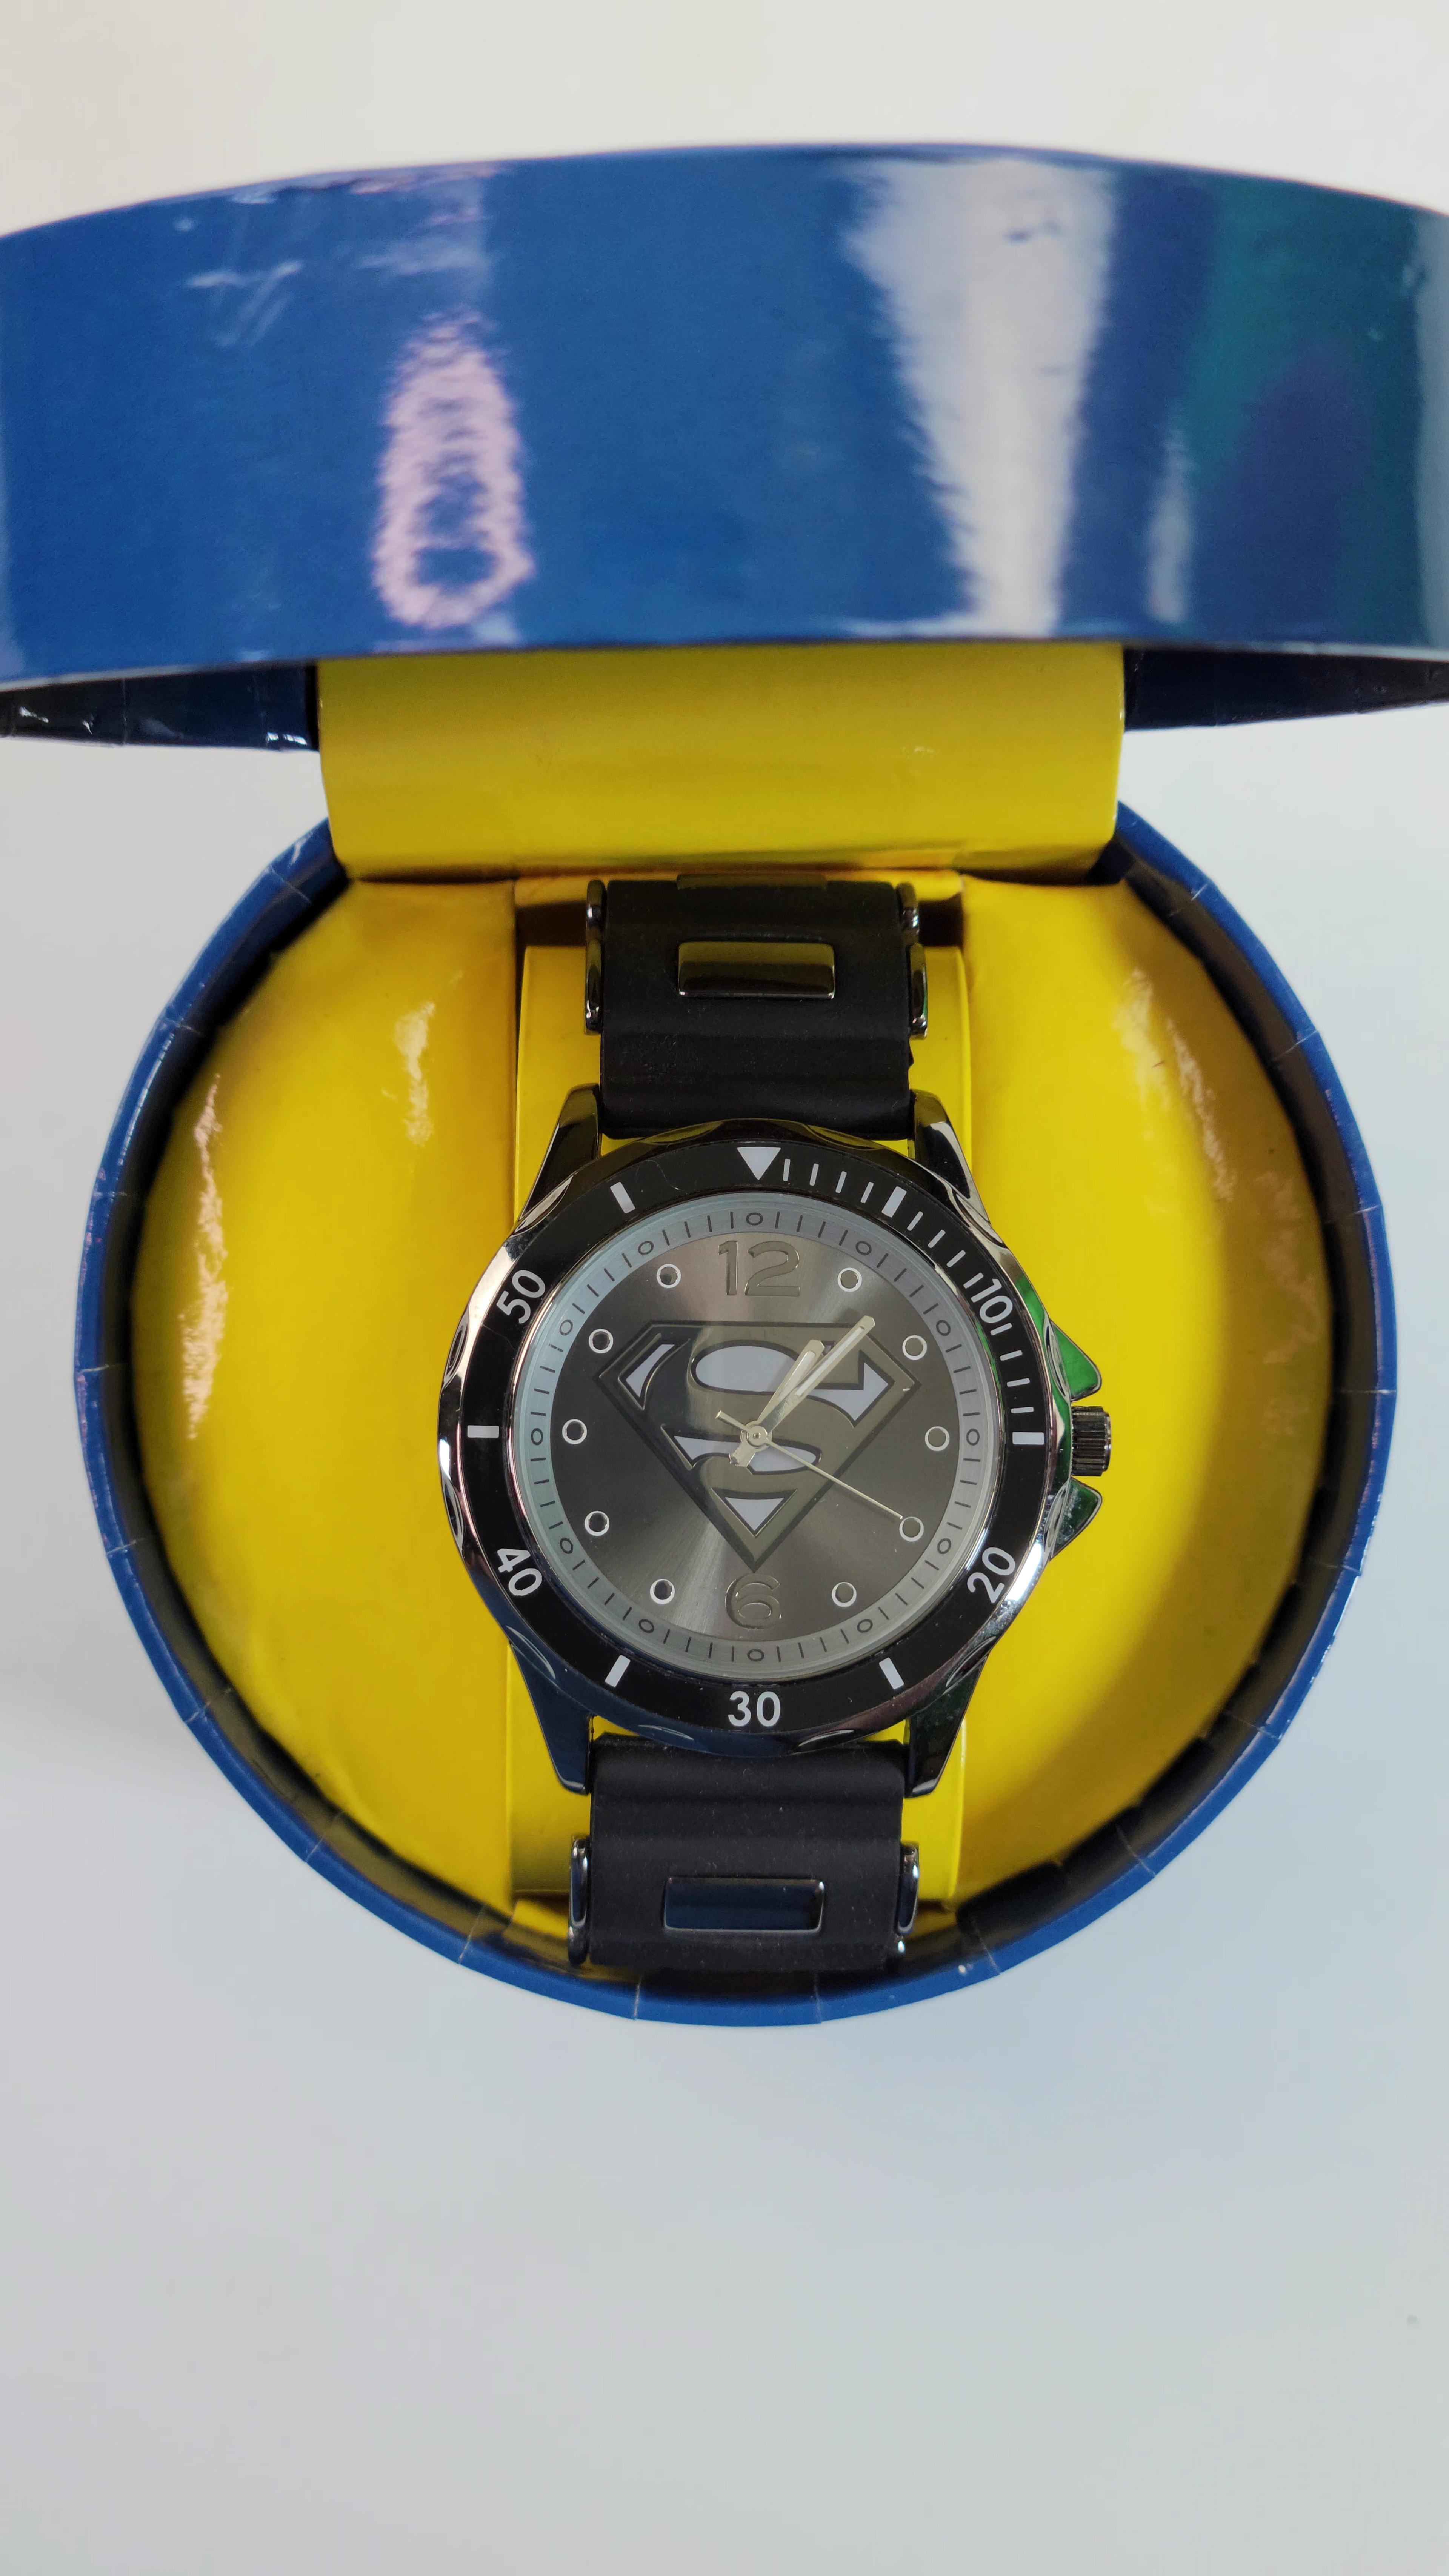 Superman Accutime Watch w/ Collectible Display Case